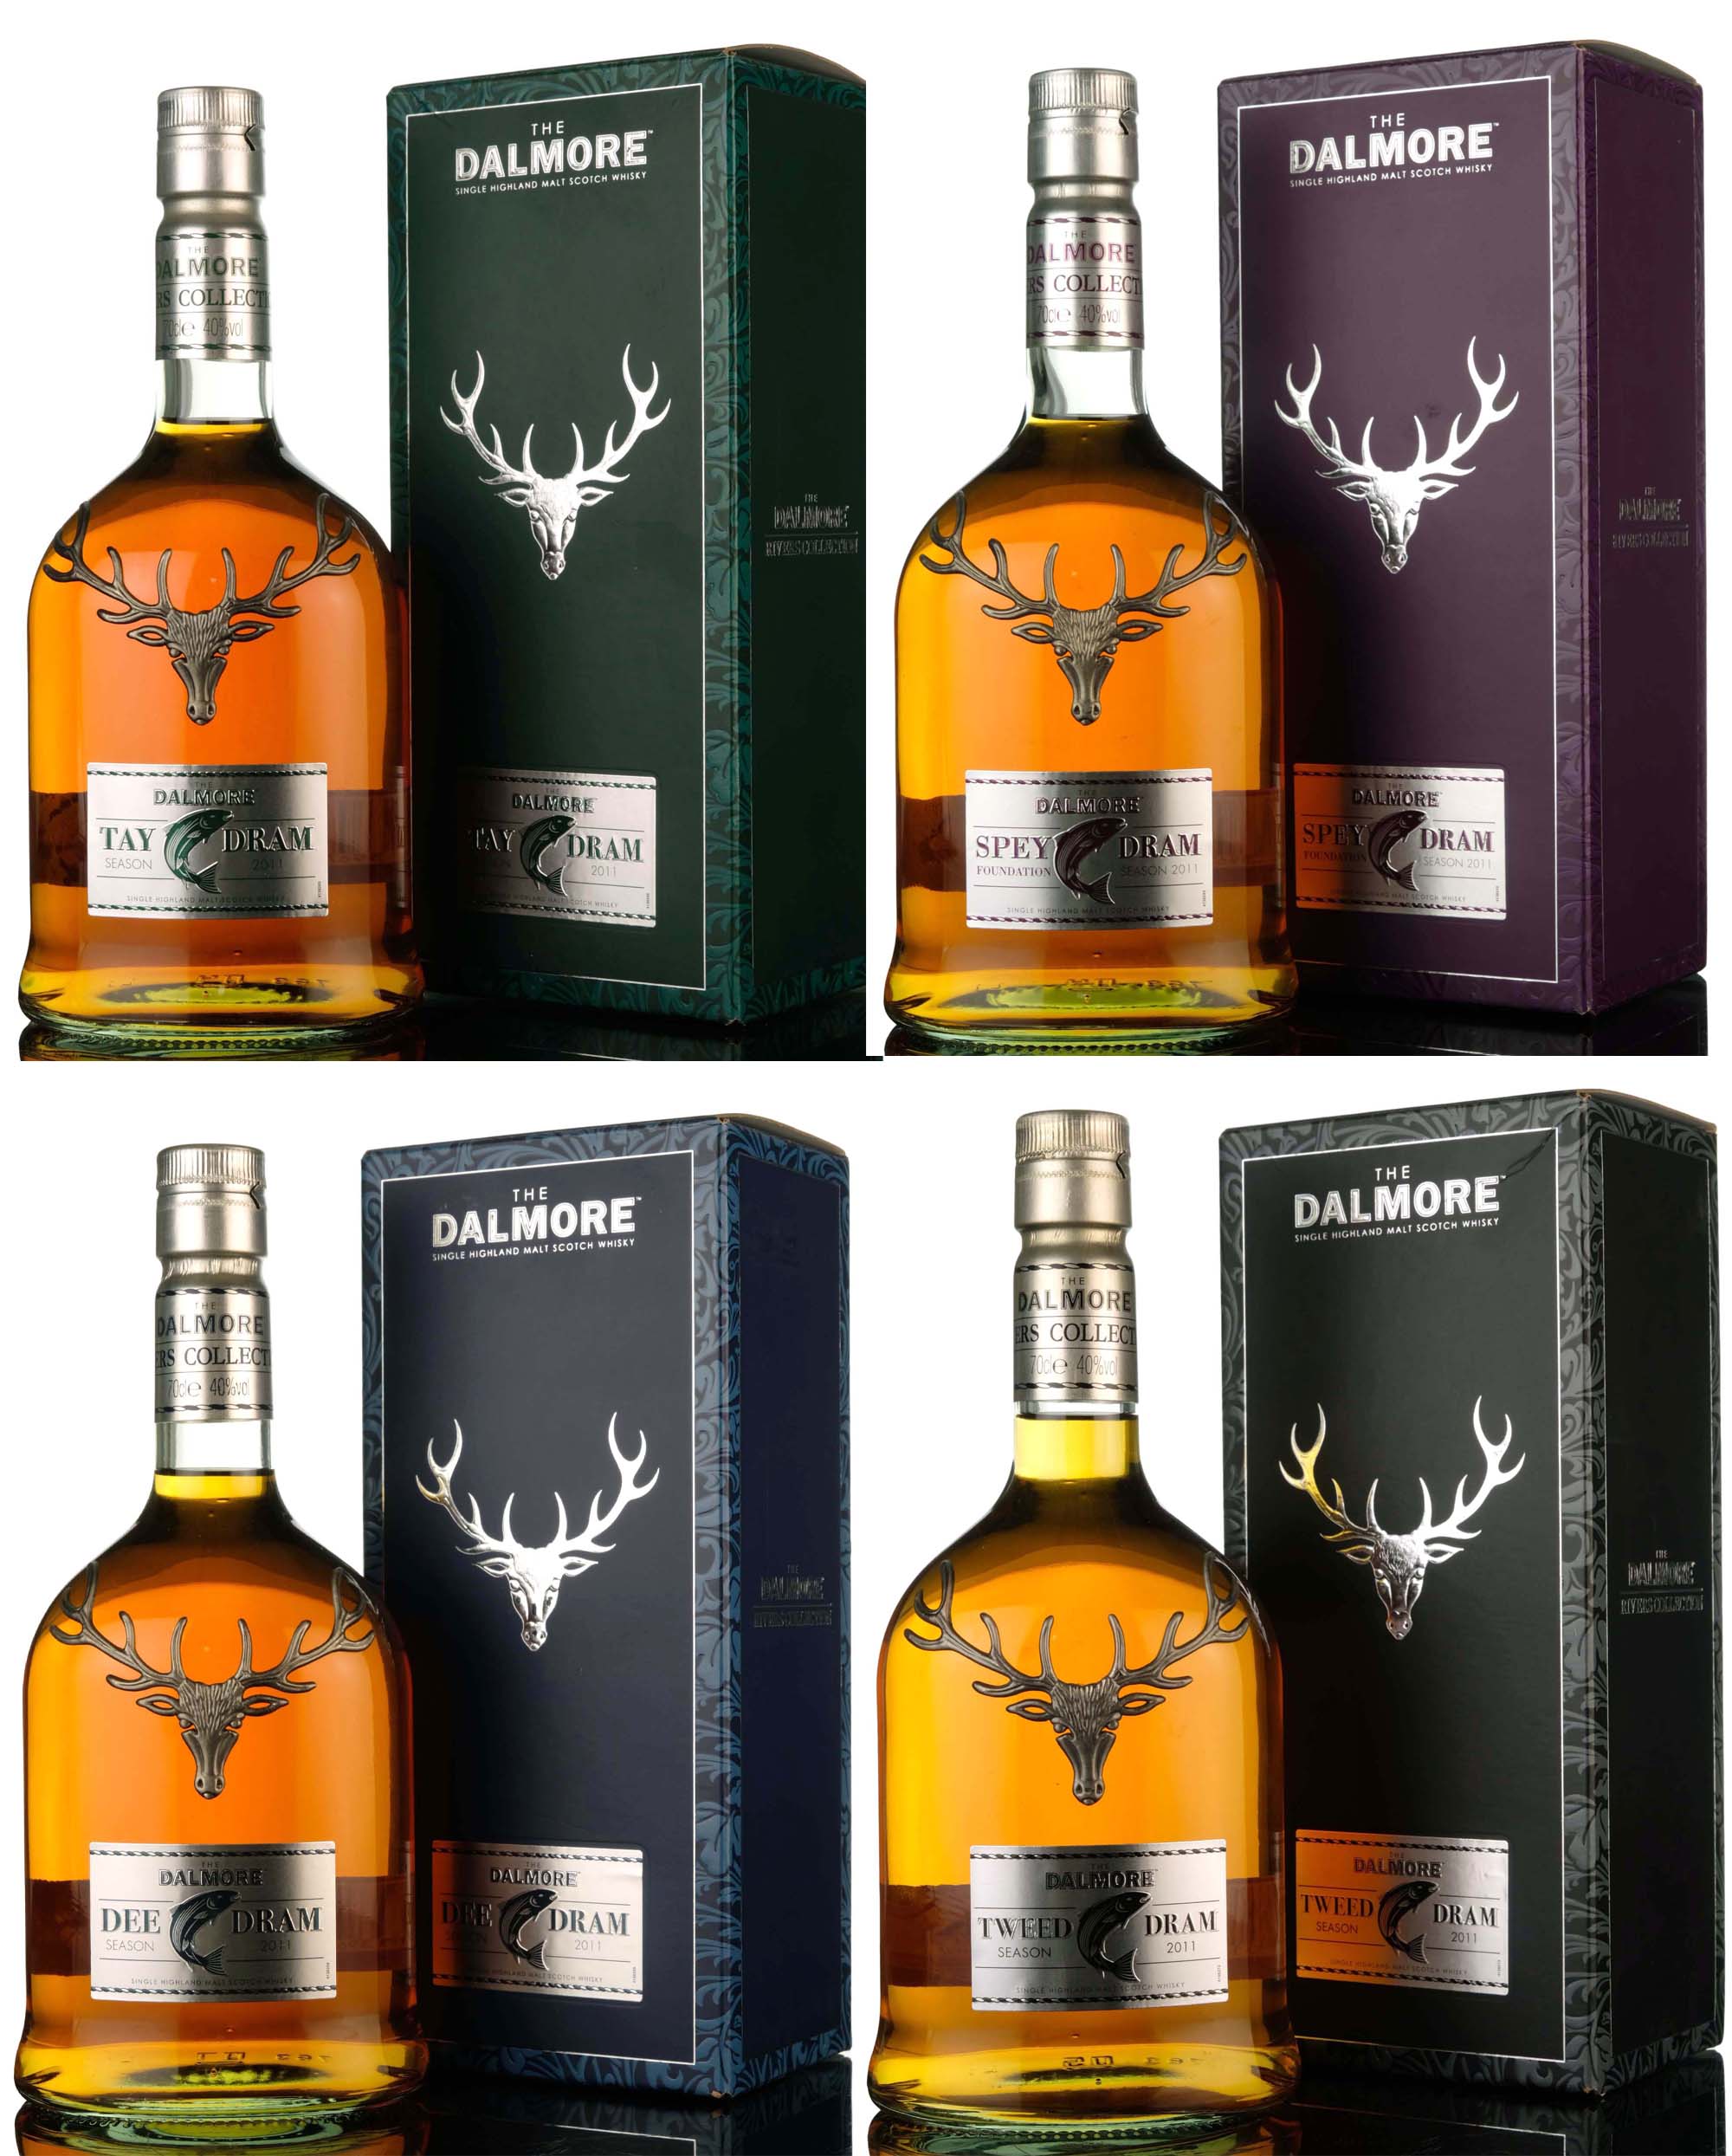 Dalmore Rivers Collection - Dee, Spey, Tay and Tweed Drams - 2011 Release